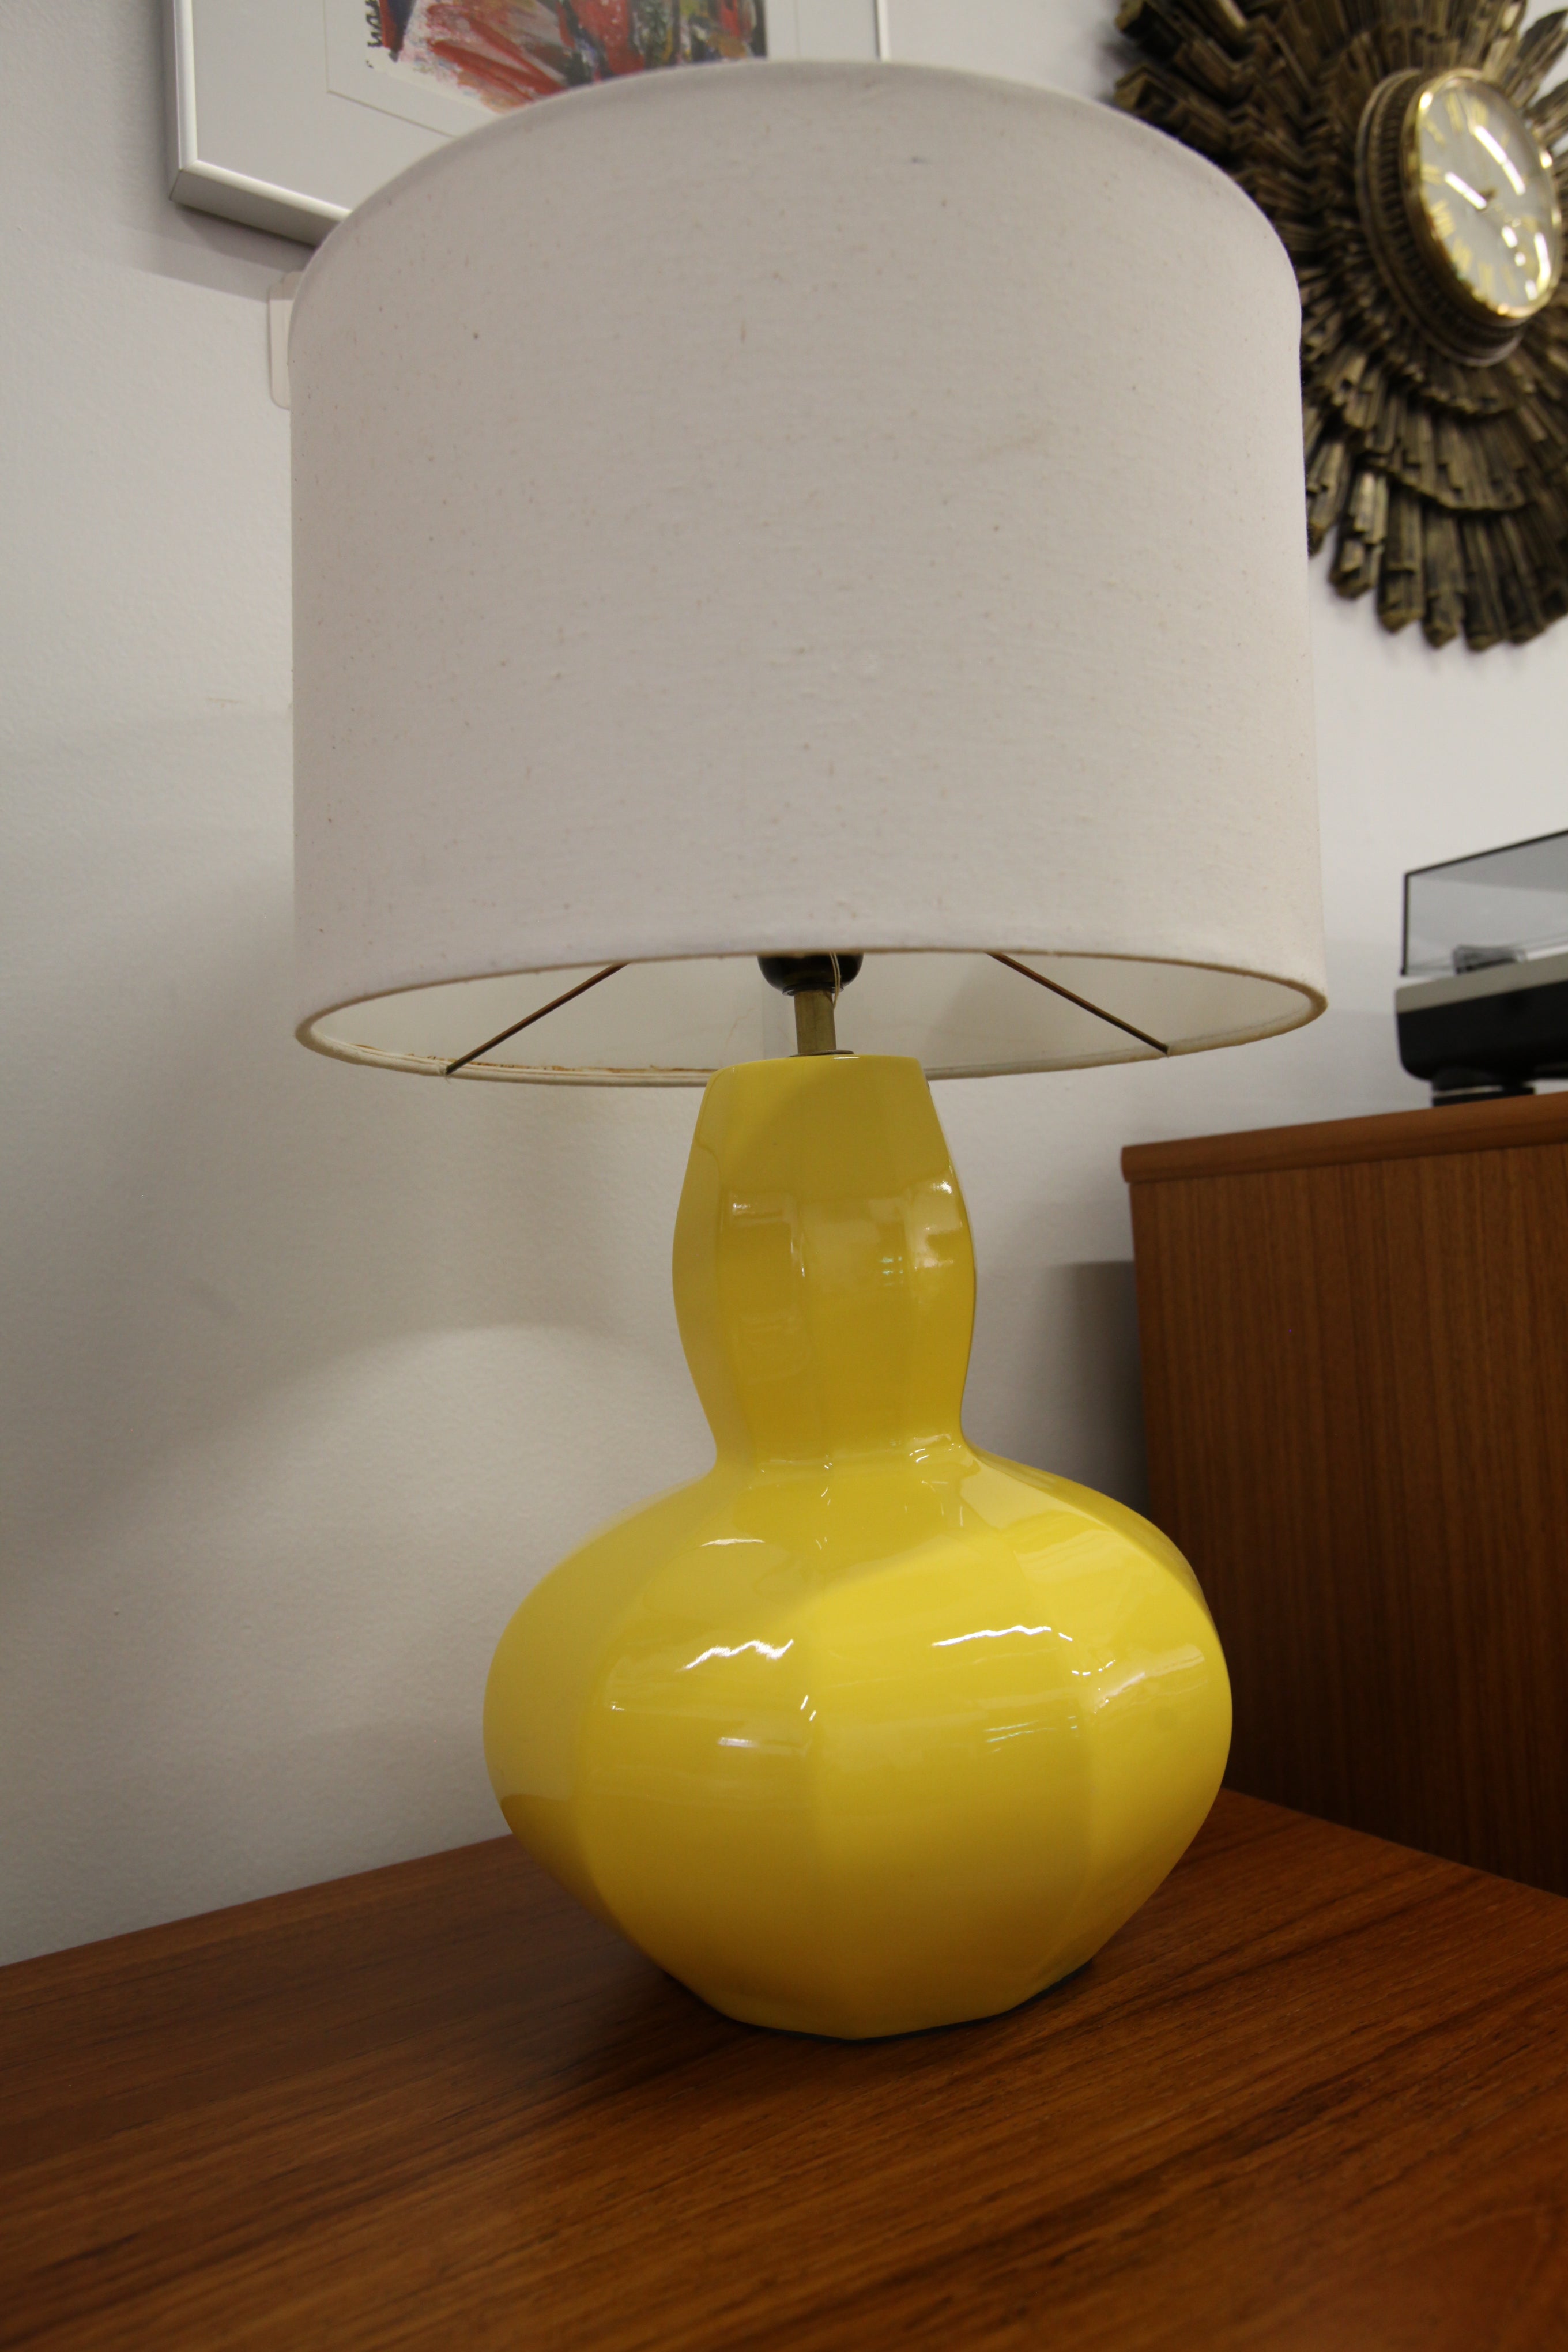 Vintage Yellow Table Lamp (20"H x 12.75" Dia.)